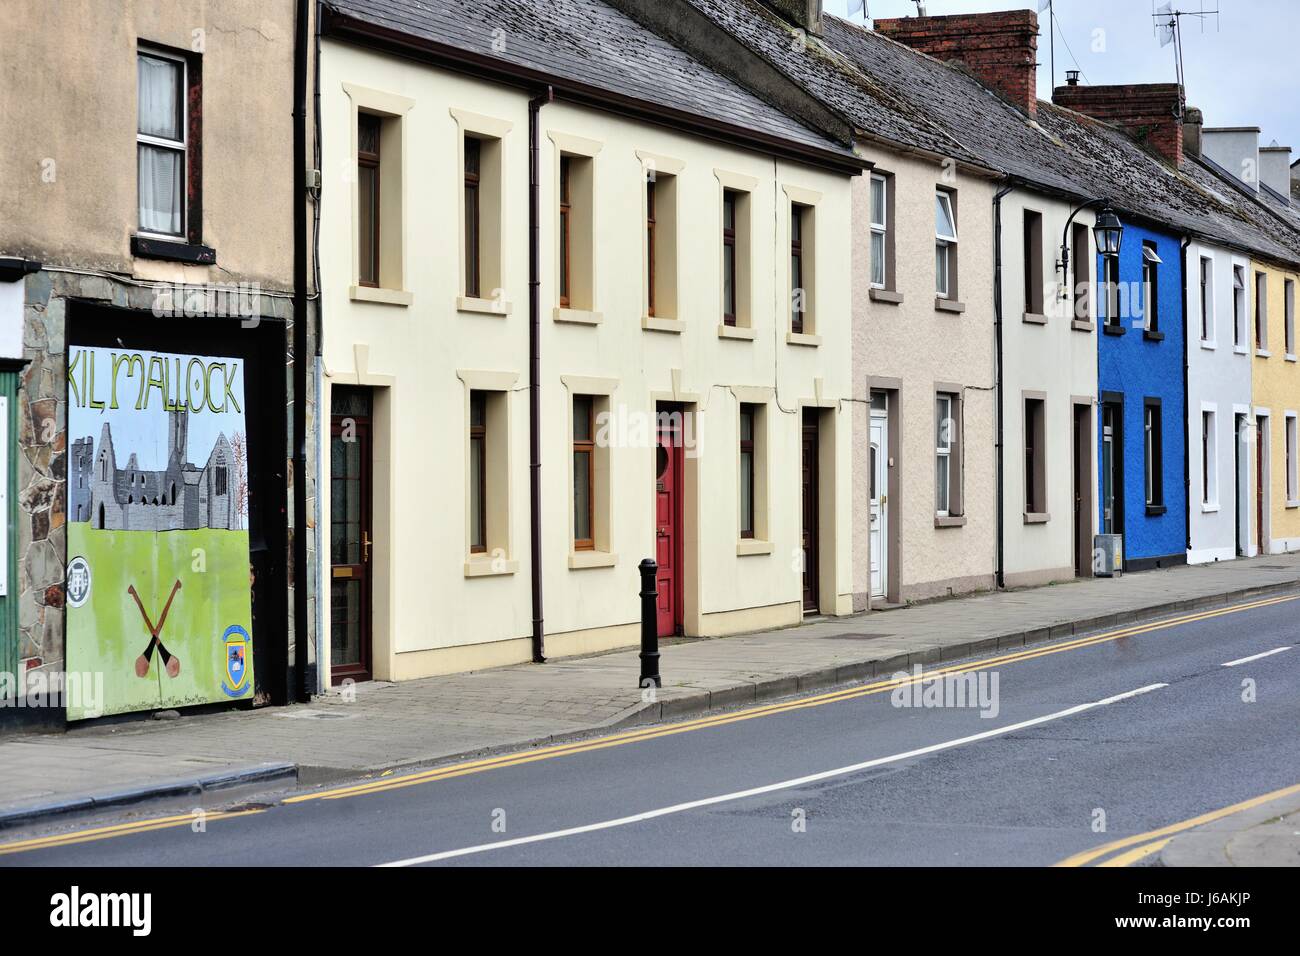 Color provides variety for a block of residences on Sarsfield Street in the town of Kilmallock, County Limerick, Ireland. Stock Photo